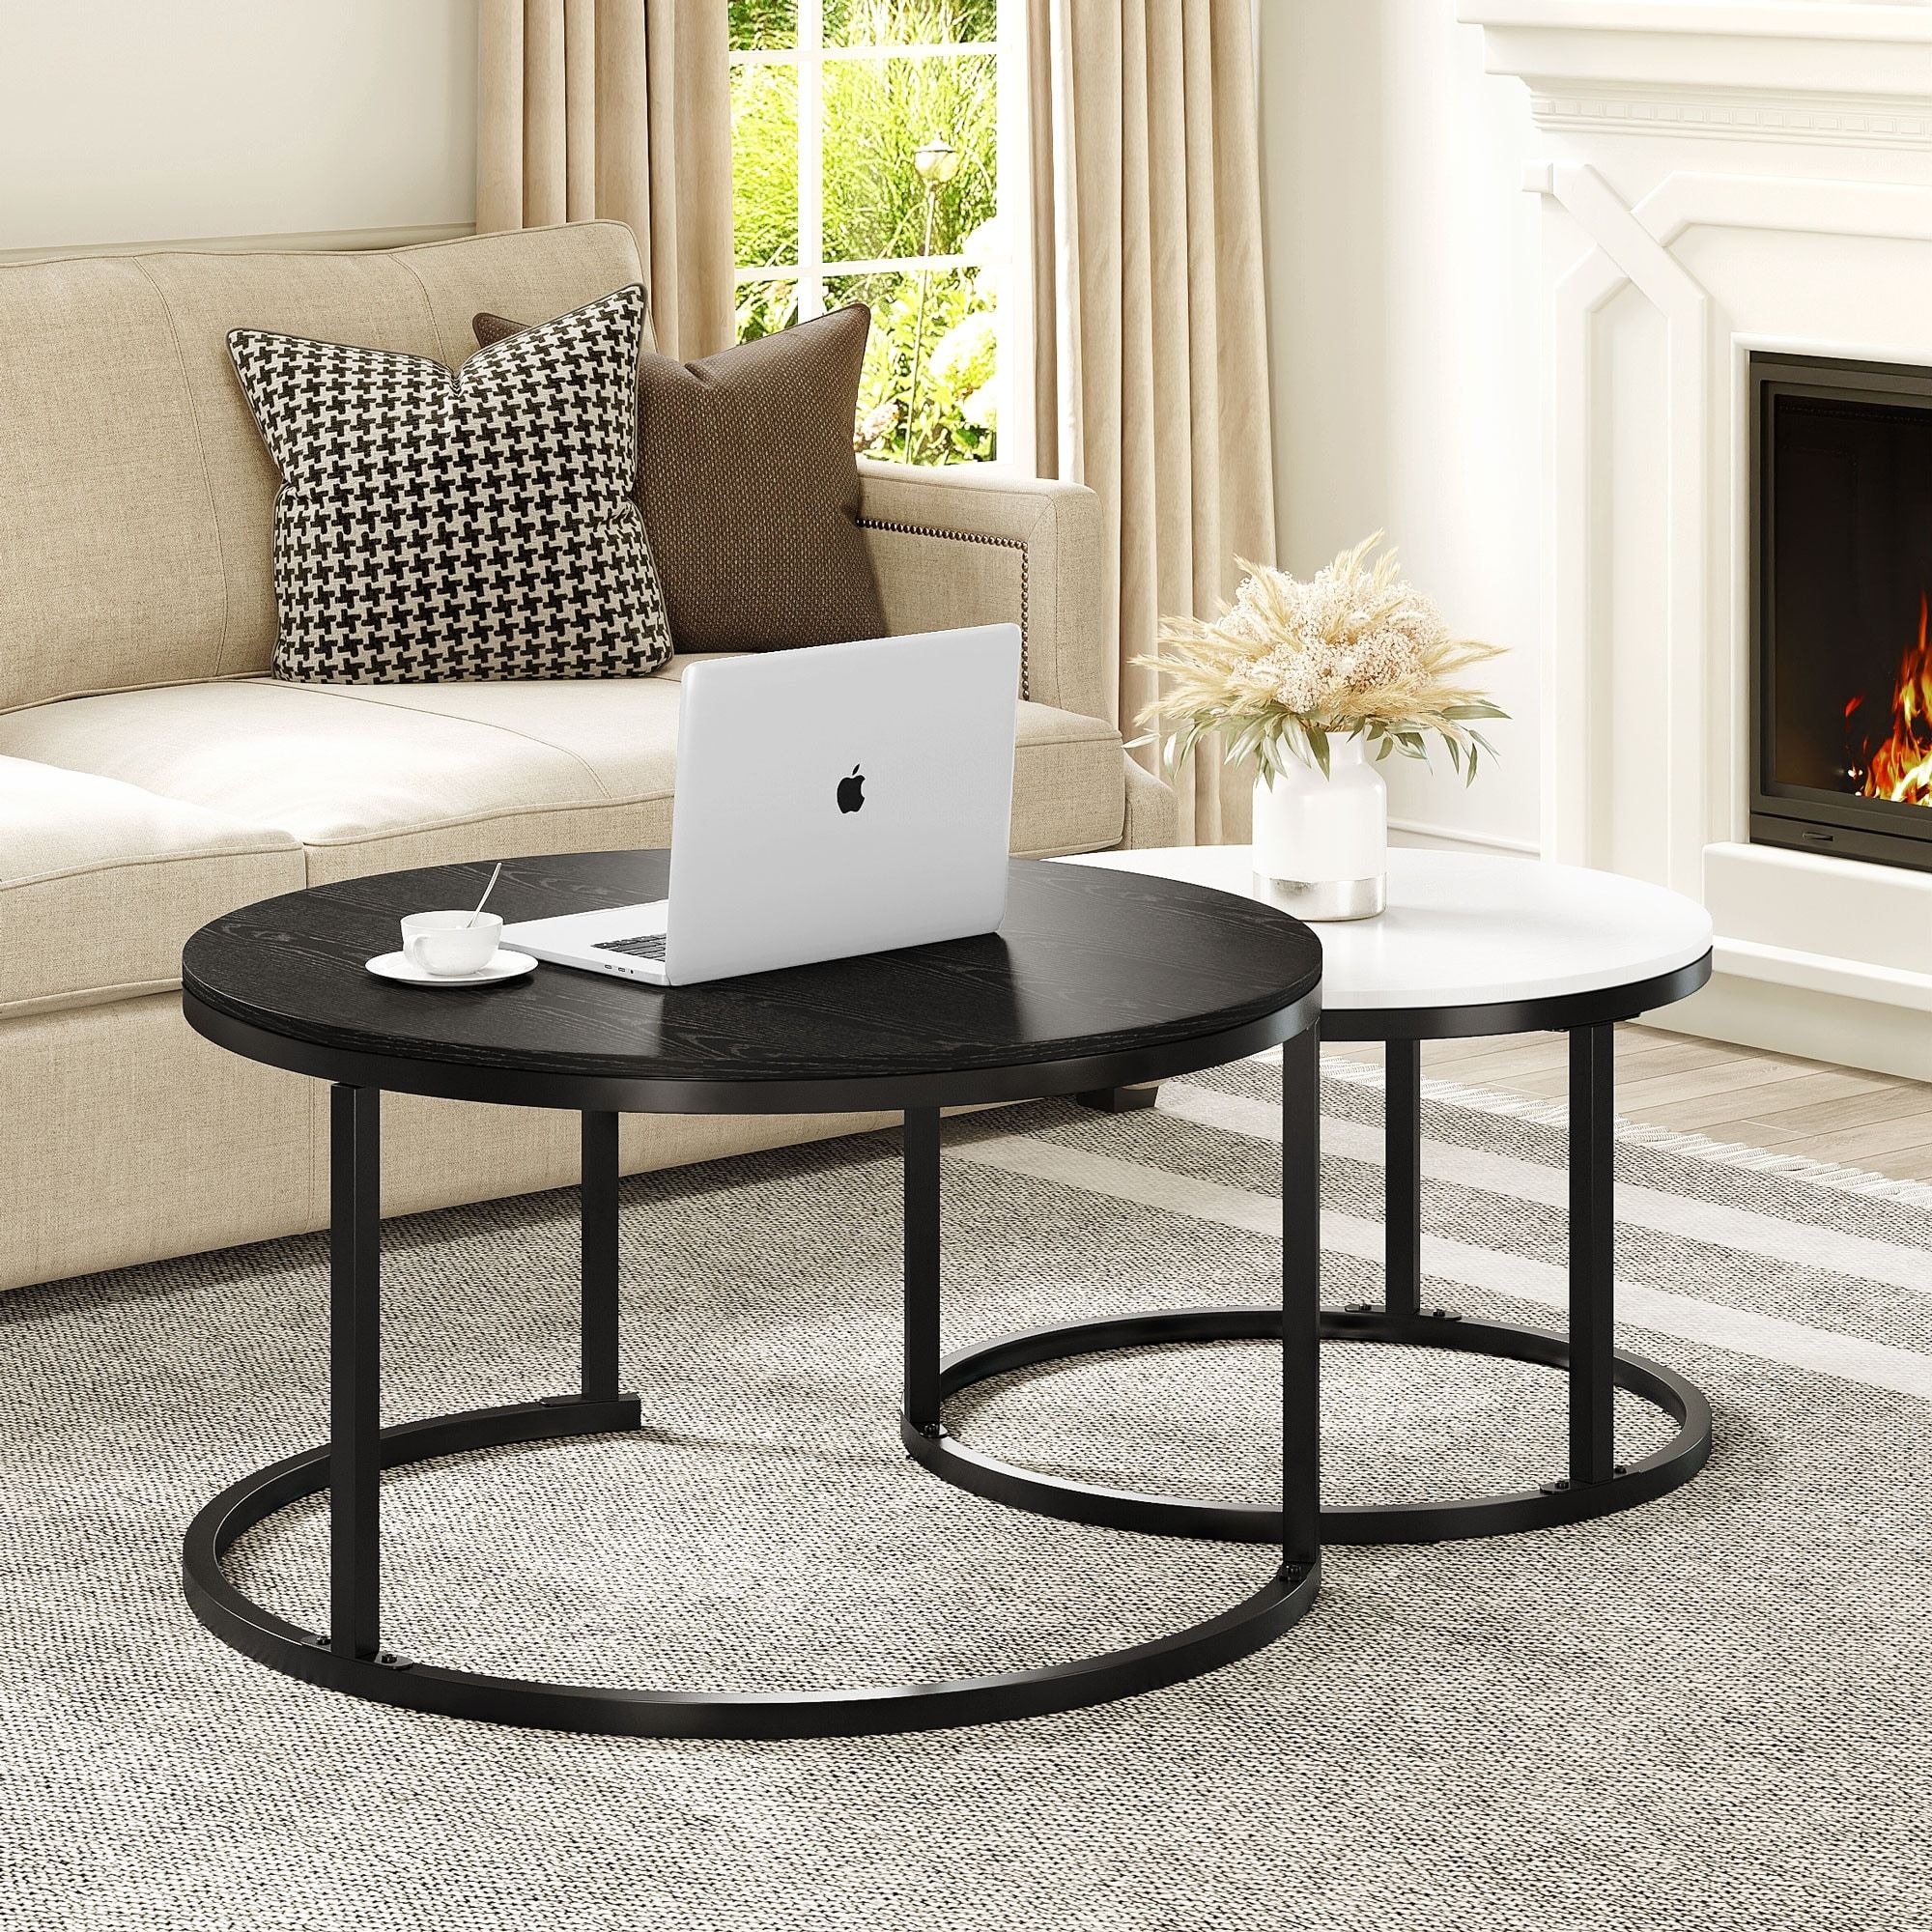 Modern Nesting Round Coffee Table Set Of 2 For Living Room Black And White  – On Sale – Bed Bath & Beyond – 37364175 With Regard To Modern Nesting Coffee Tables (View 4 of 15)